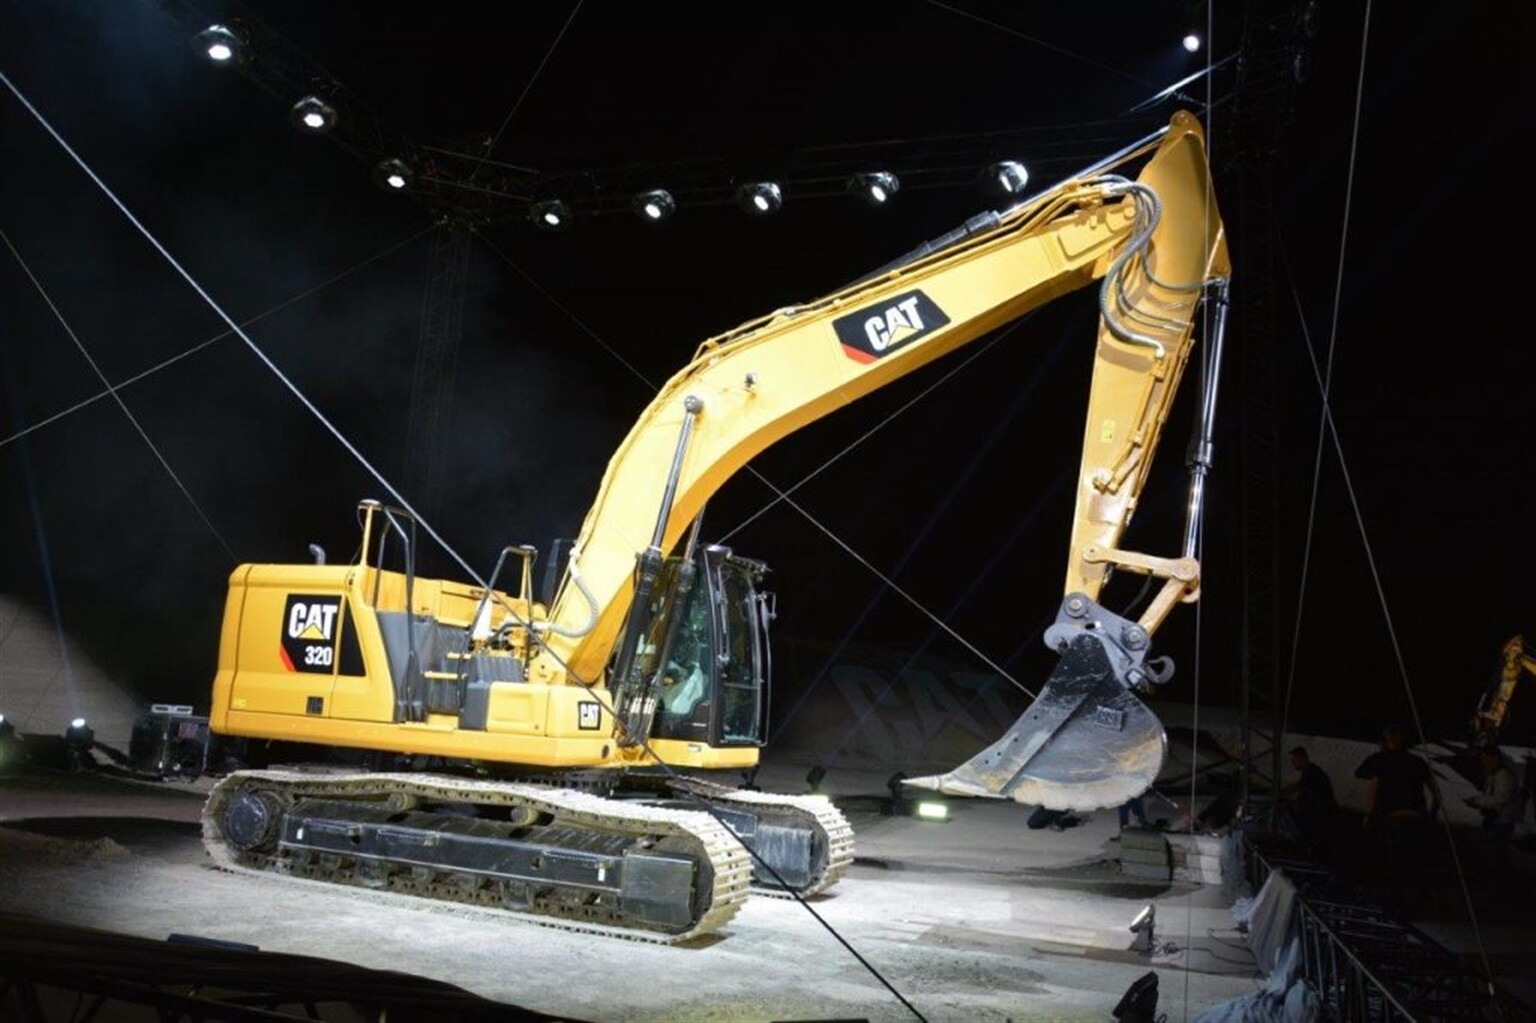 High tech and high expectations with the new Cat excavators